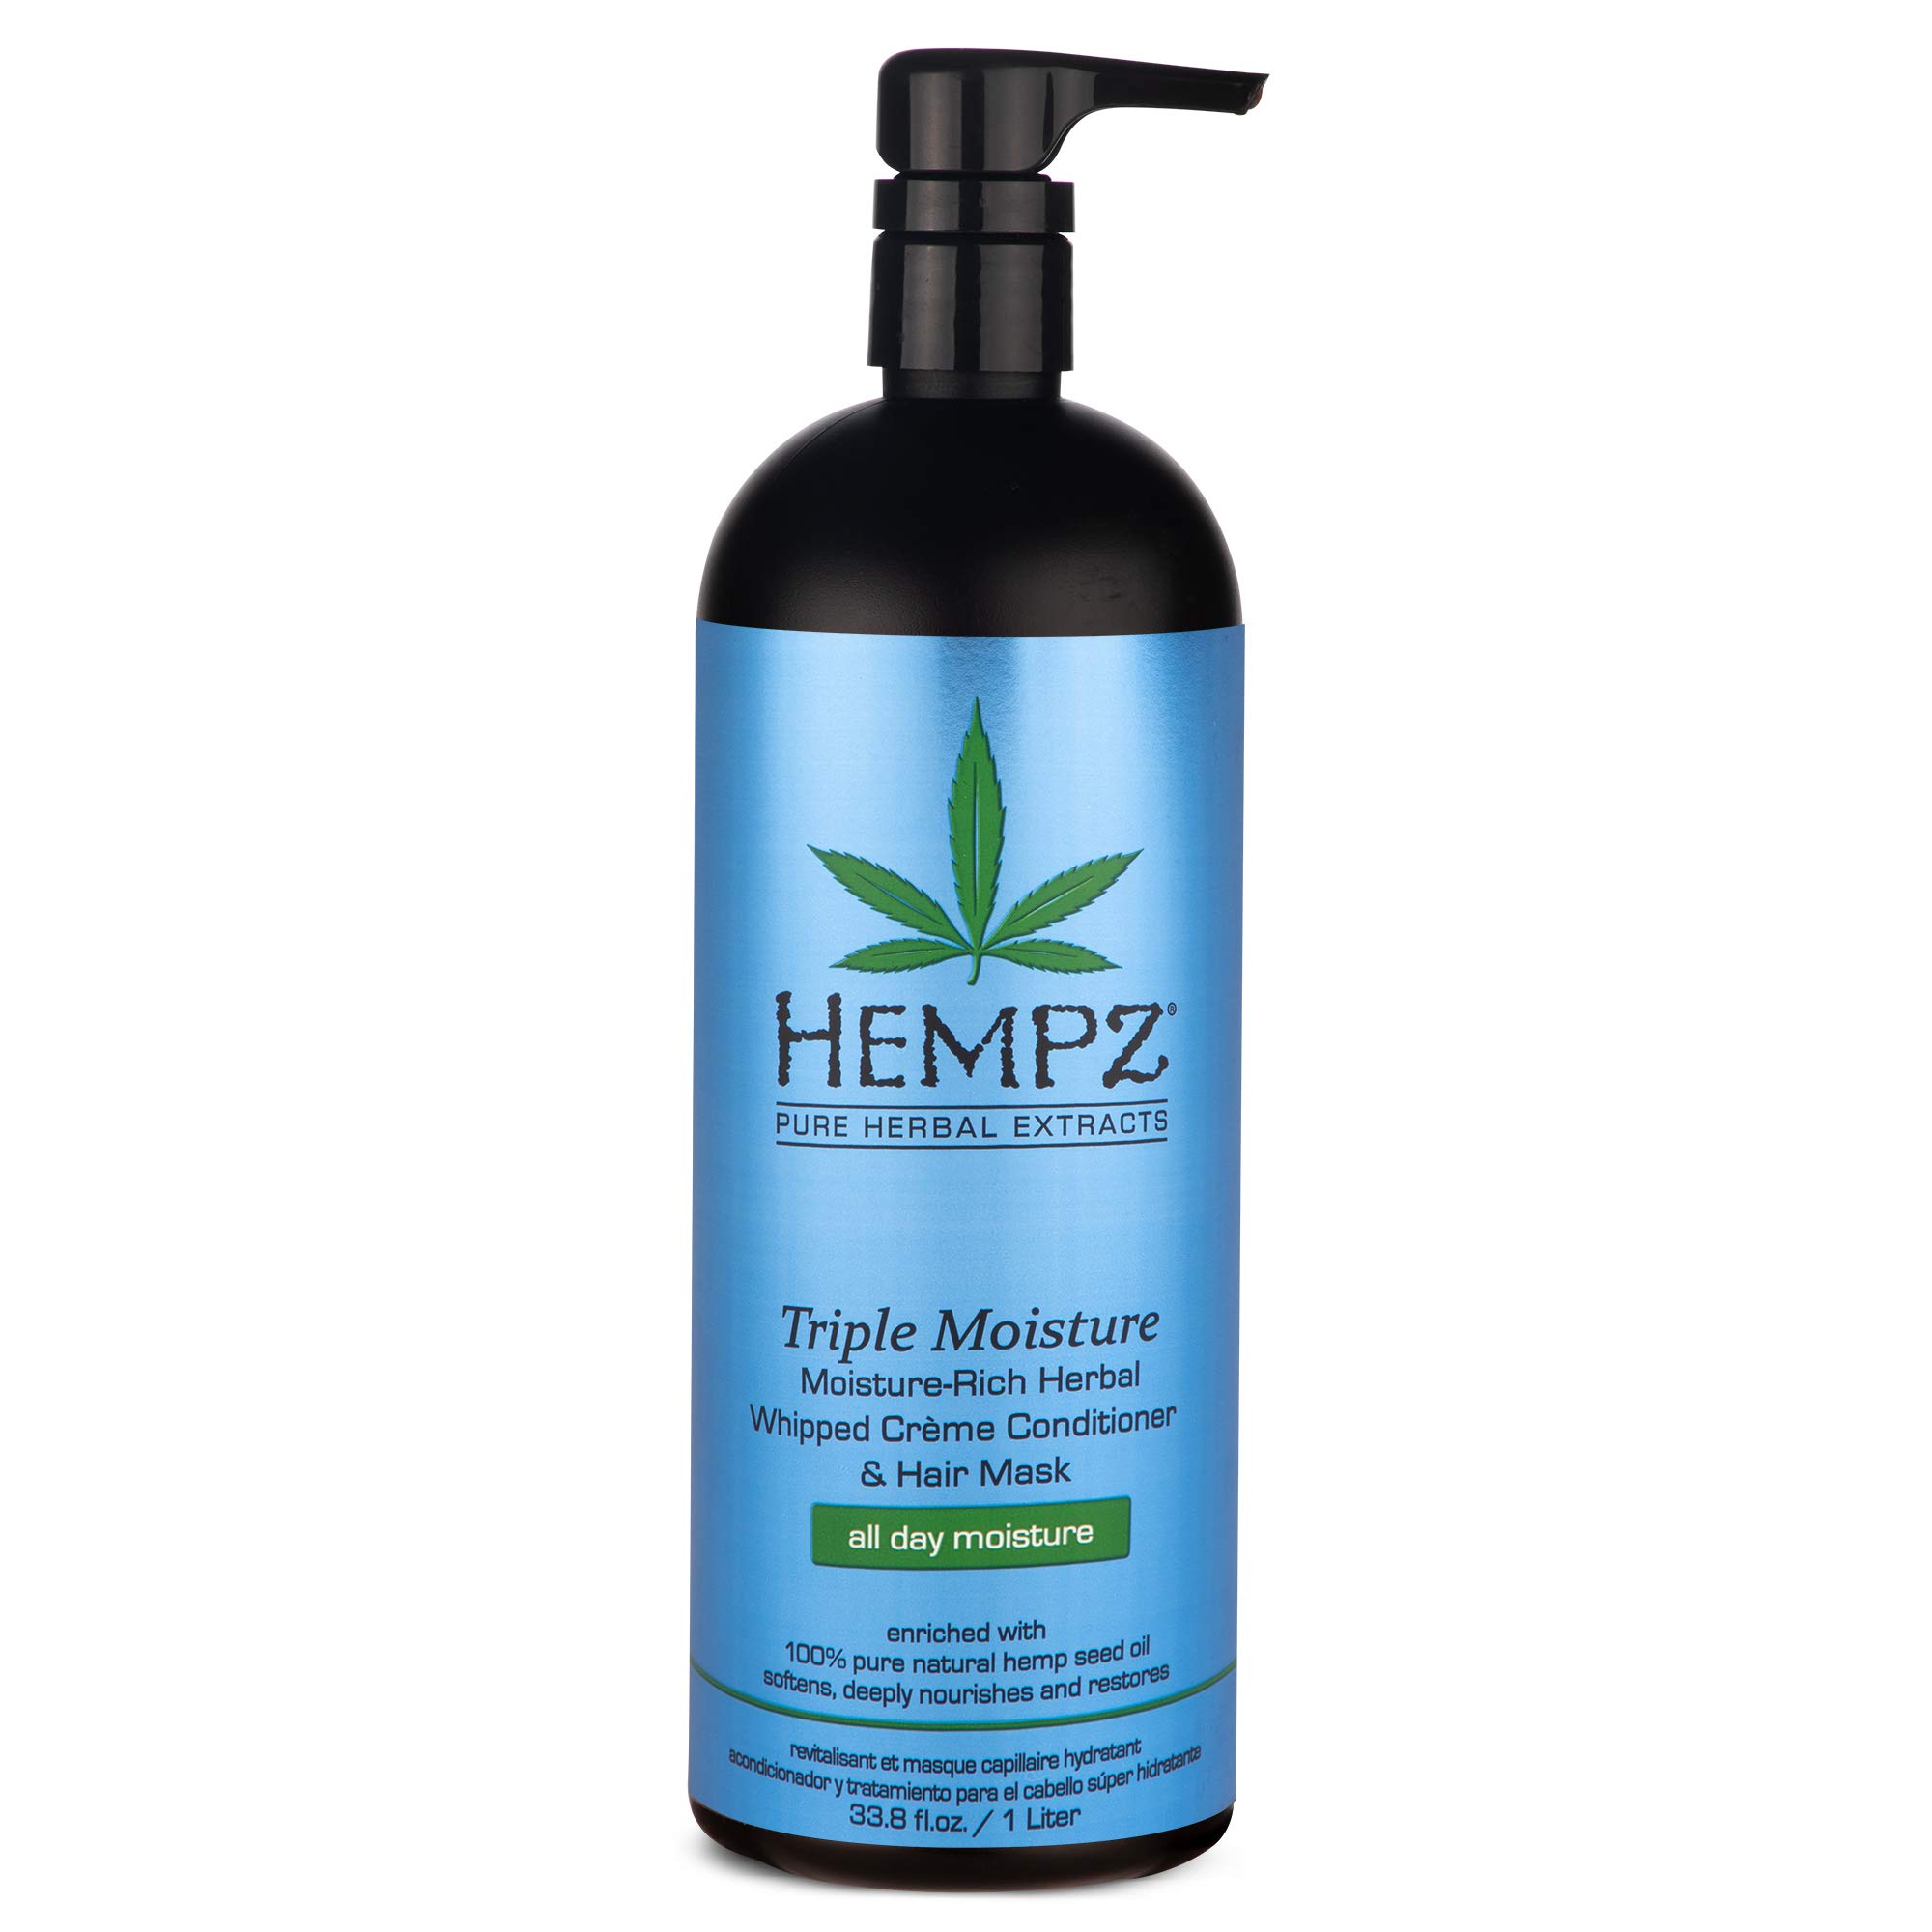 Hempz Triple Moisture-Rich Herbal Whipped Creme Conditioner and Hair Mask for Women and Men, 33.8 oz. - Premium, Natural Moisturizing Conditioners to Repair Dry, Damaged Hair - Scented Hair Care